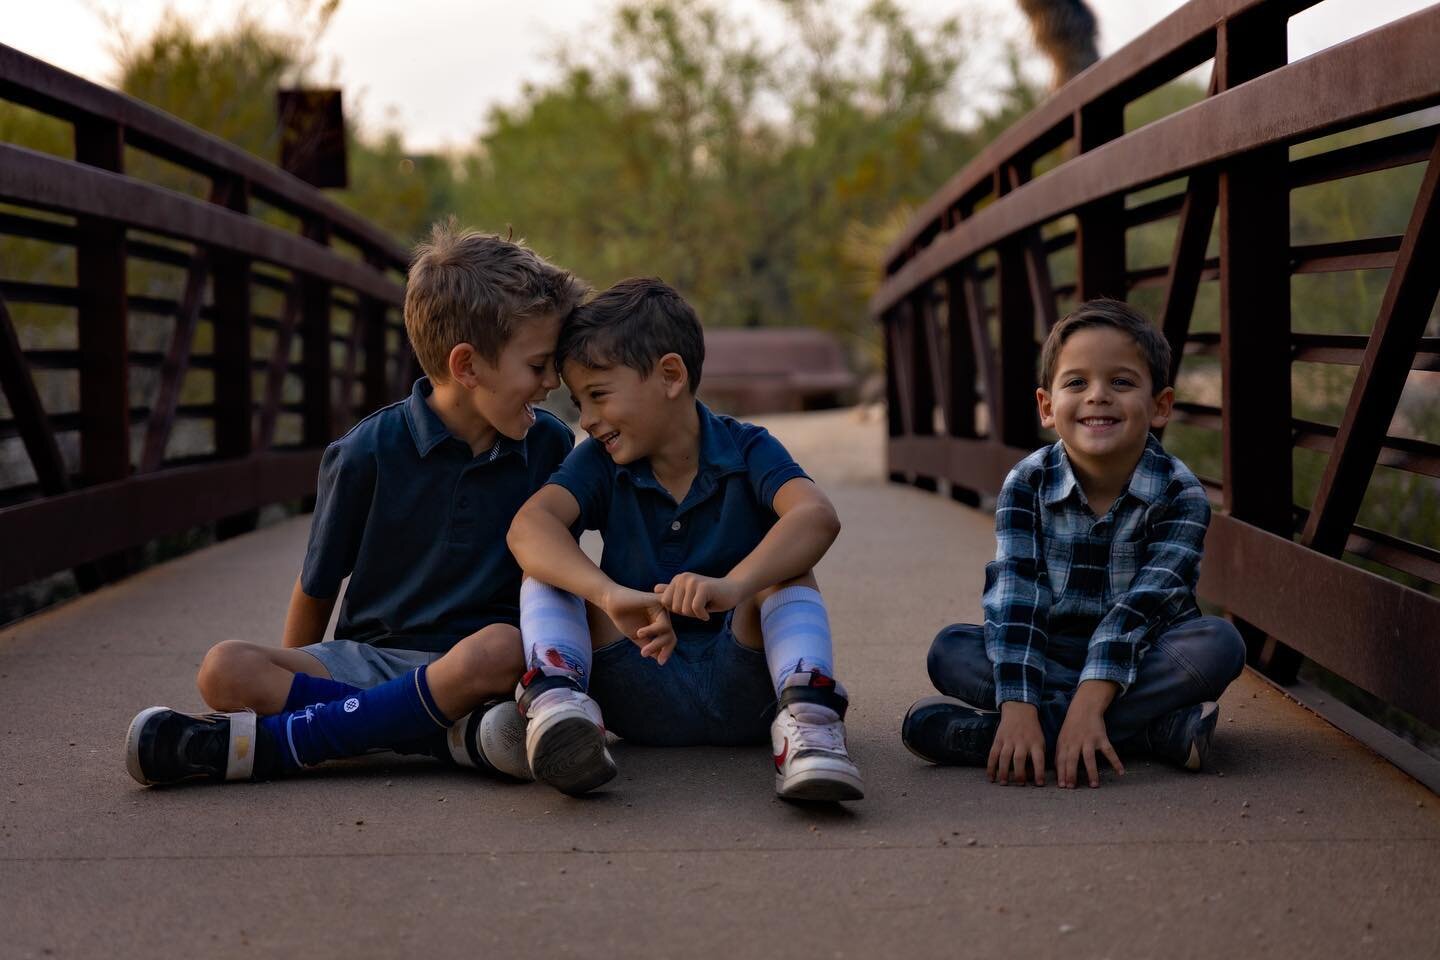 I just can&rsquo;t with these cuties. Look at those smiles and bond they have ❤️

#familyphotography #scottsdale #scottsdalephotographer #siblingphotoshoot